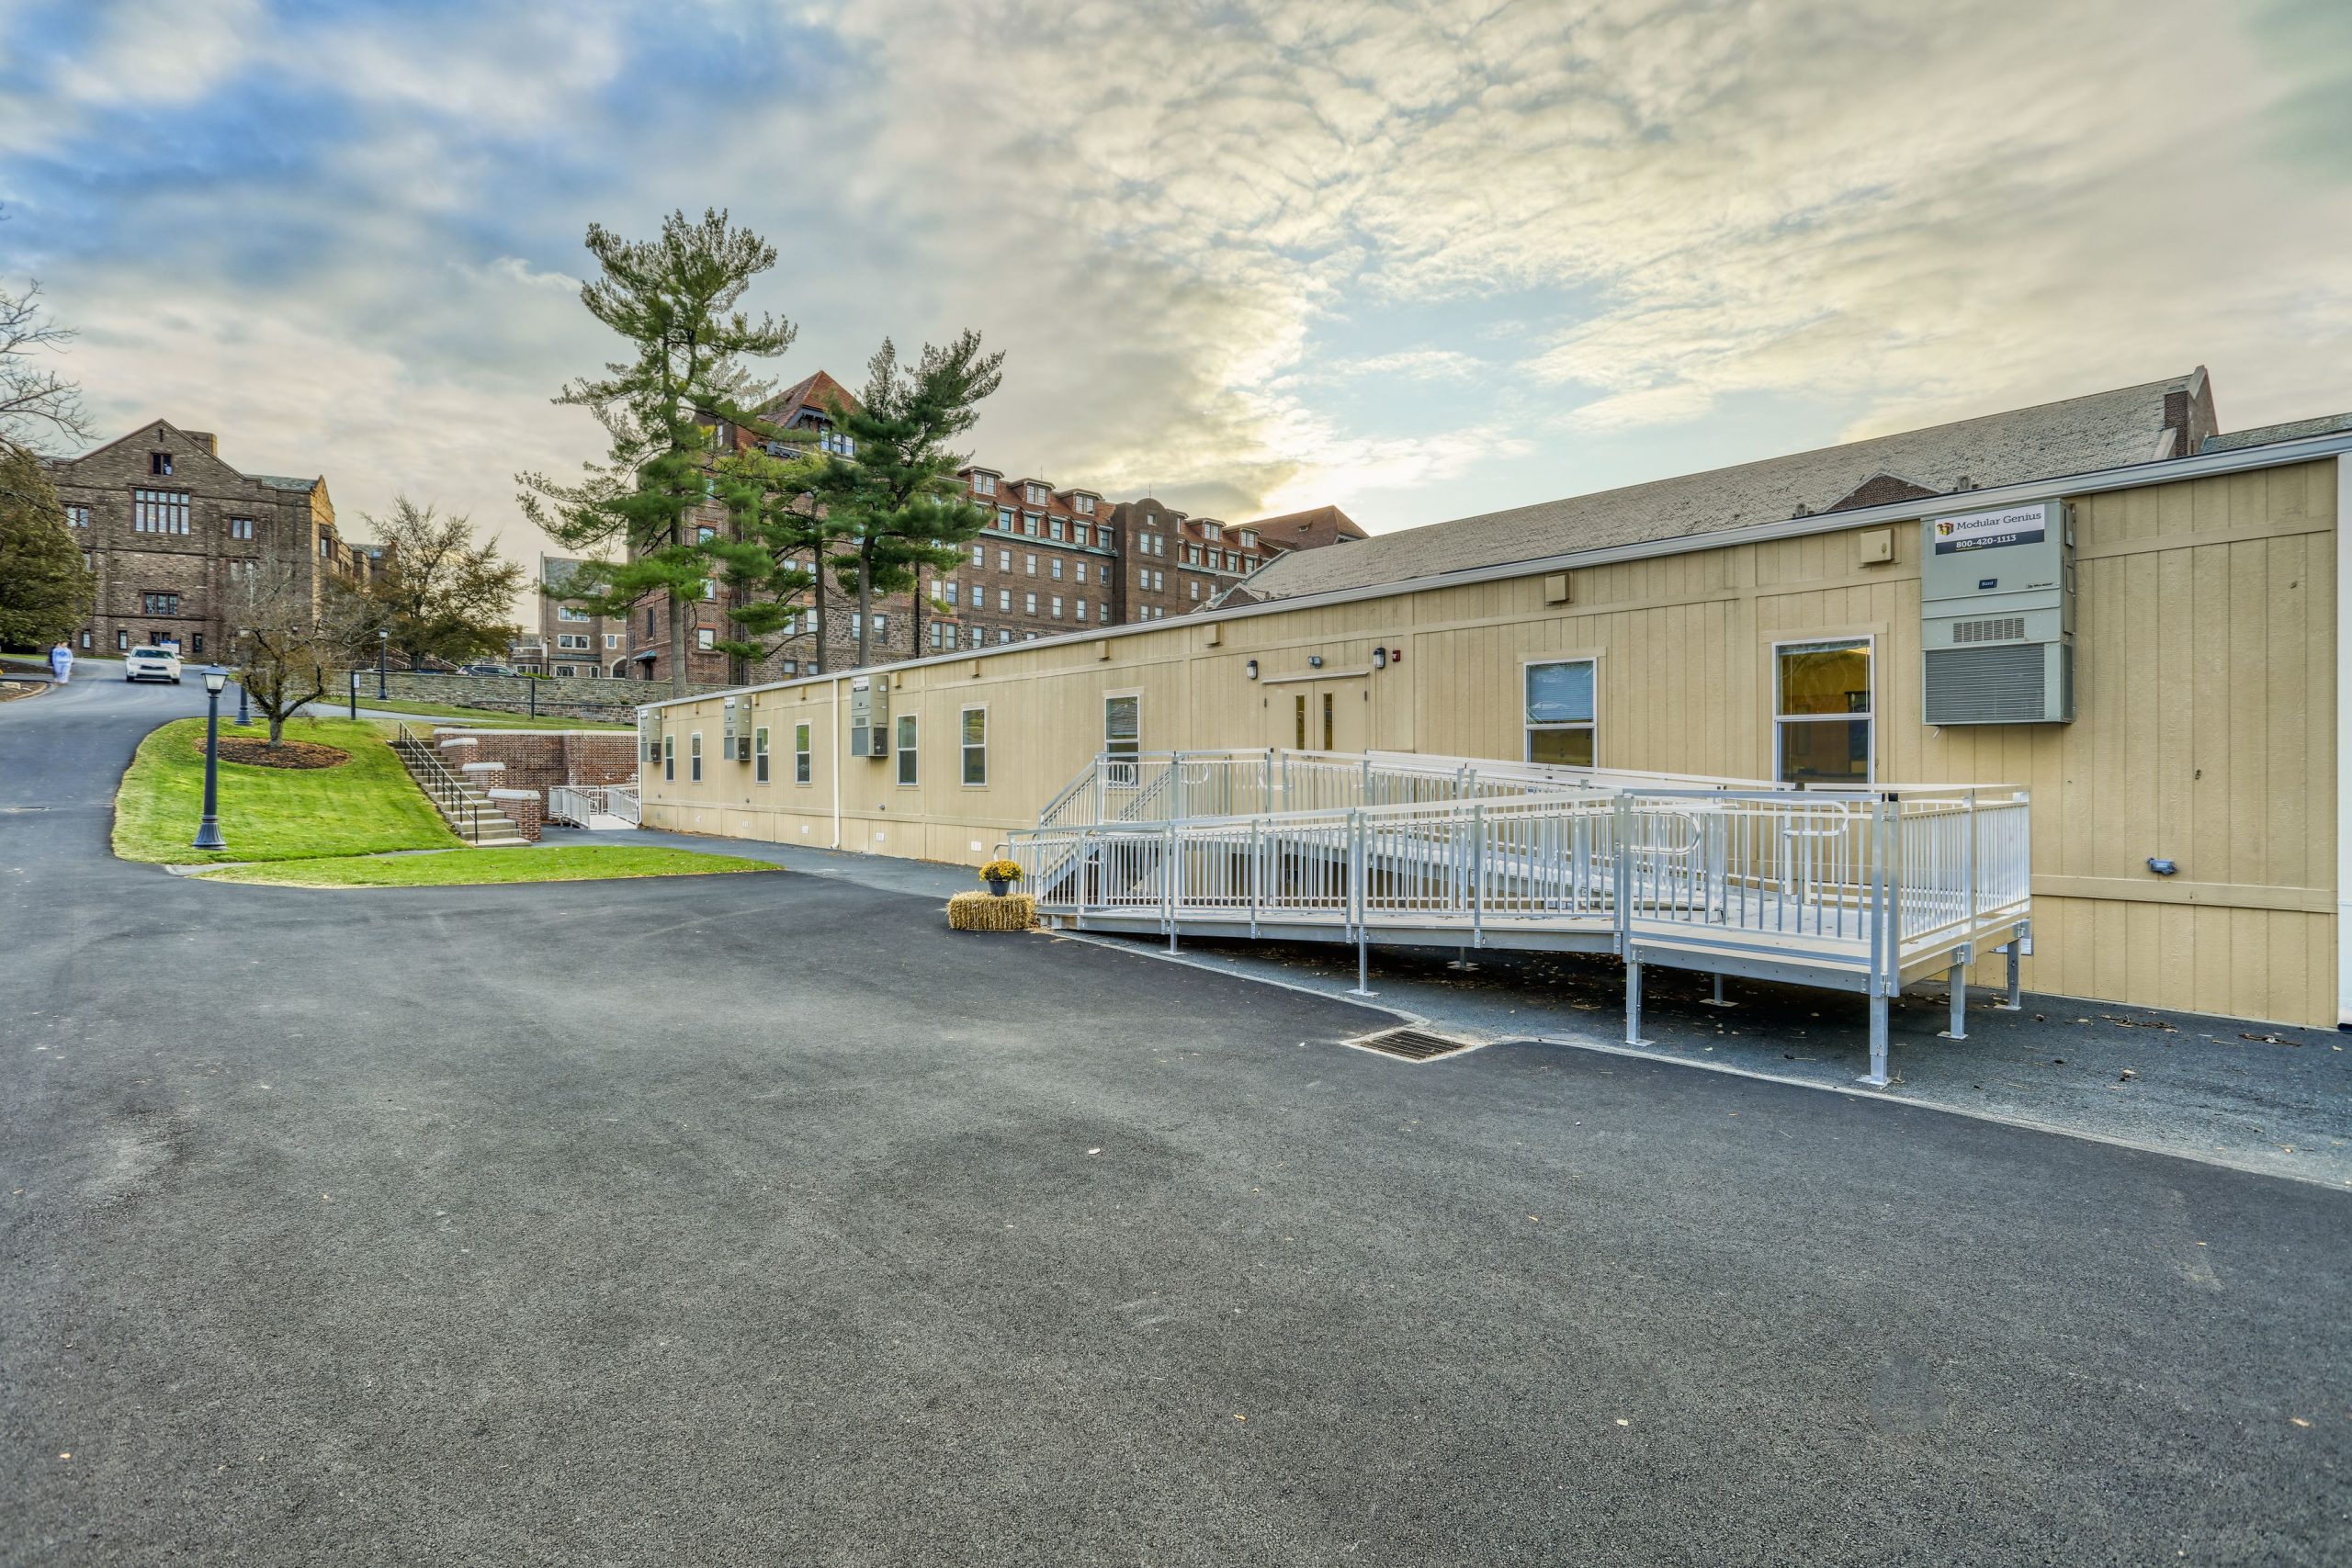 Modular Classrooms - A Solution to Overcrowding in Schools